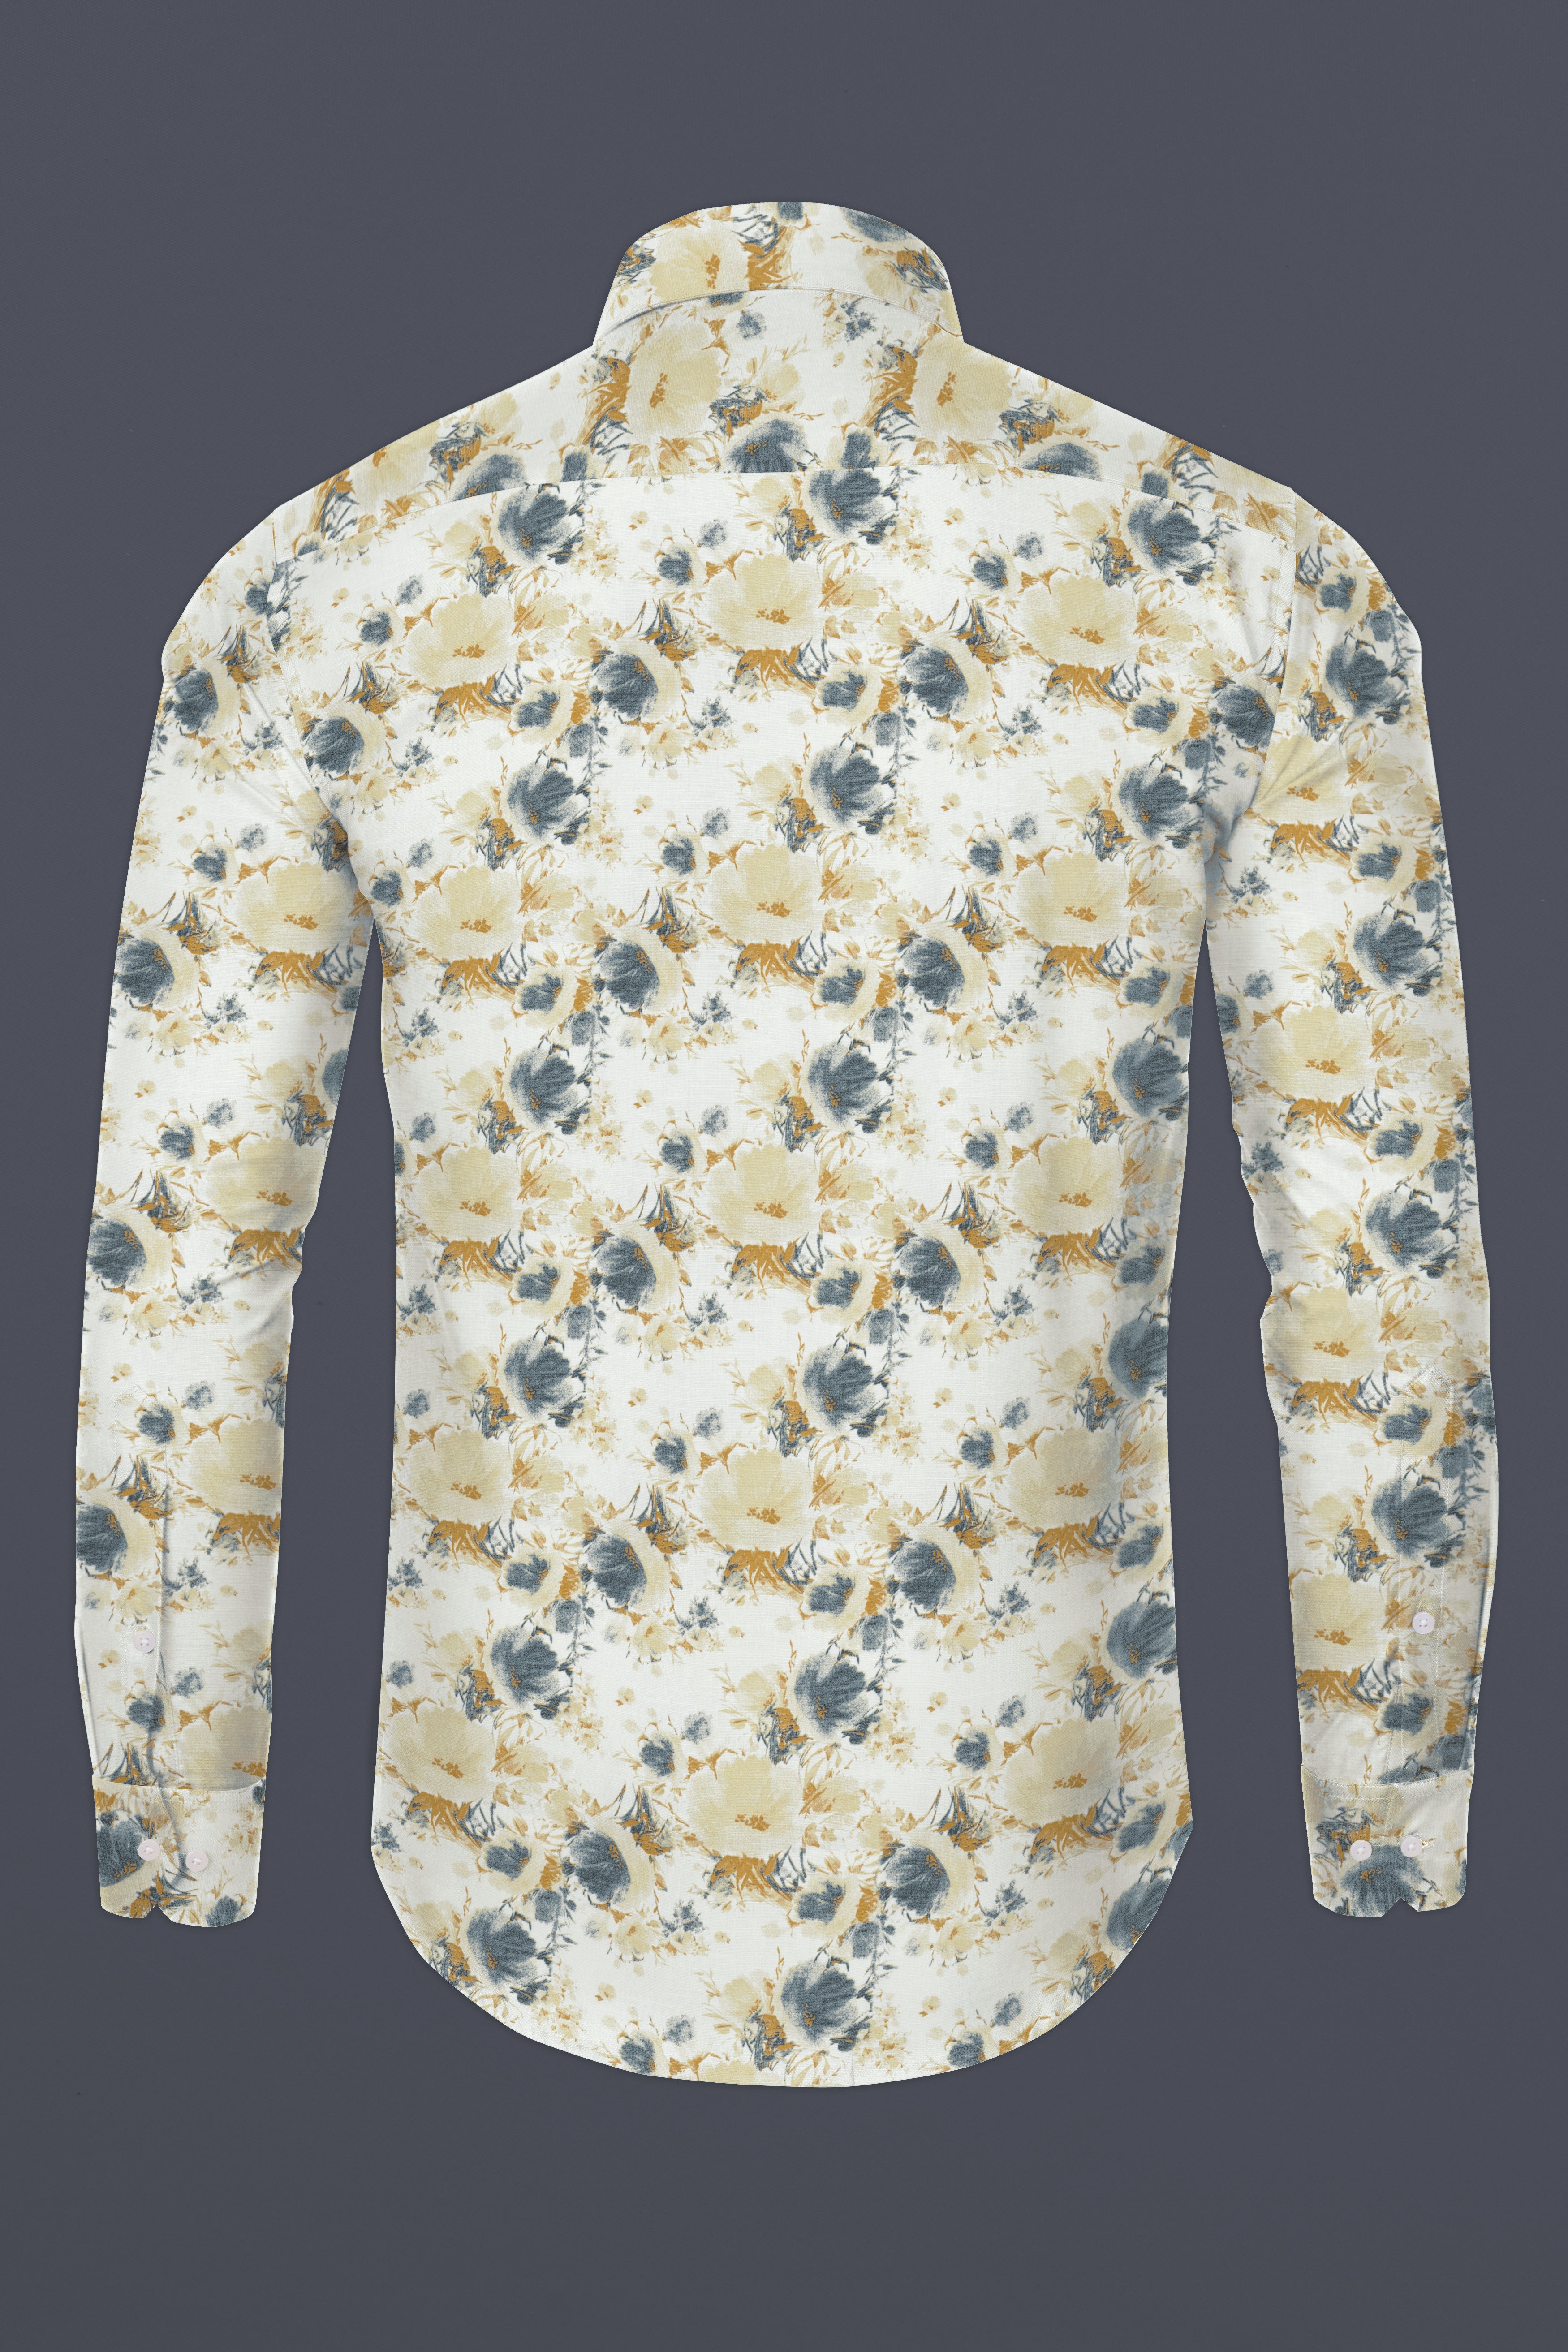 Bright White with Tussock brown Flower Printed Chambray Premium Giza Cotton Shirt